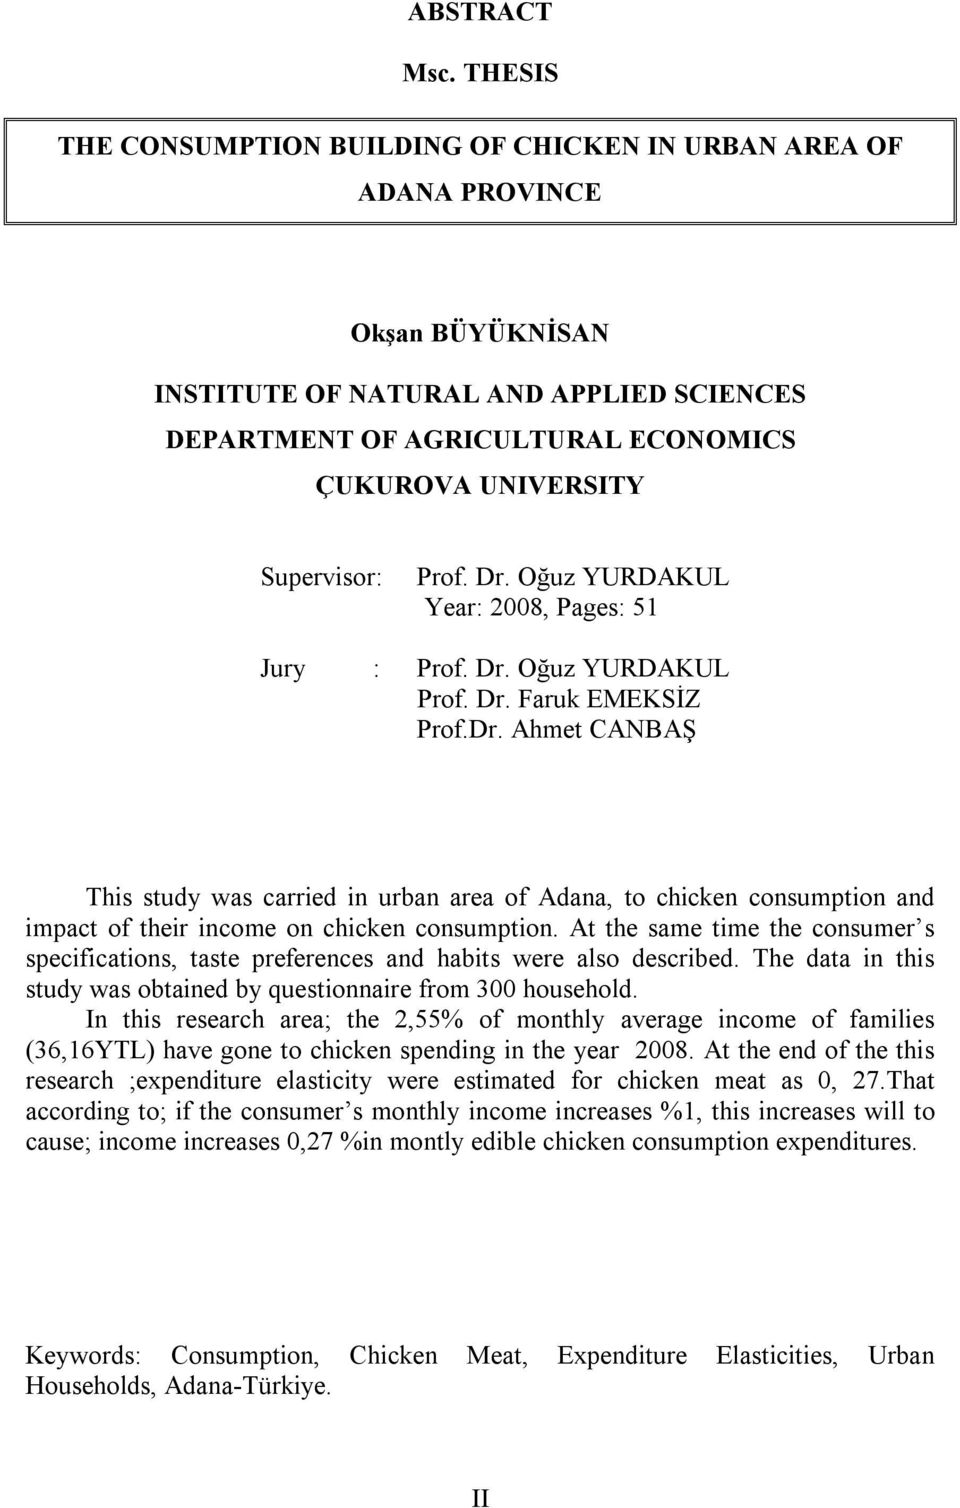 Supervisor: Prof. Dr. Oğuz YURDAKUL Year: 2008, Pages: 51 Jury : Prof. Dr. Oğuz YURDAKUL Prof. Dr. Faruk EMEKSİZ Prof.Dr. Ahmet CANBAŞ This study was carried in urban area of Adana, to chicken consumption and impact of their income on chicken consumption.